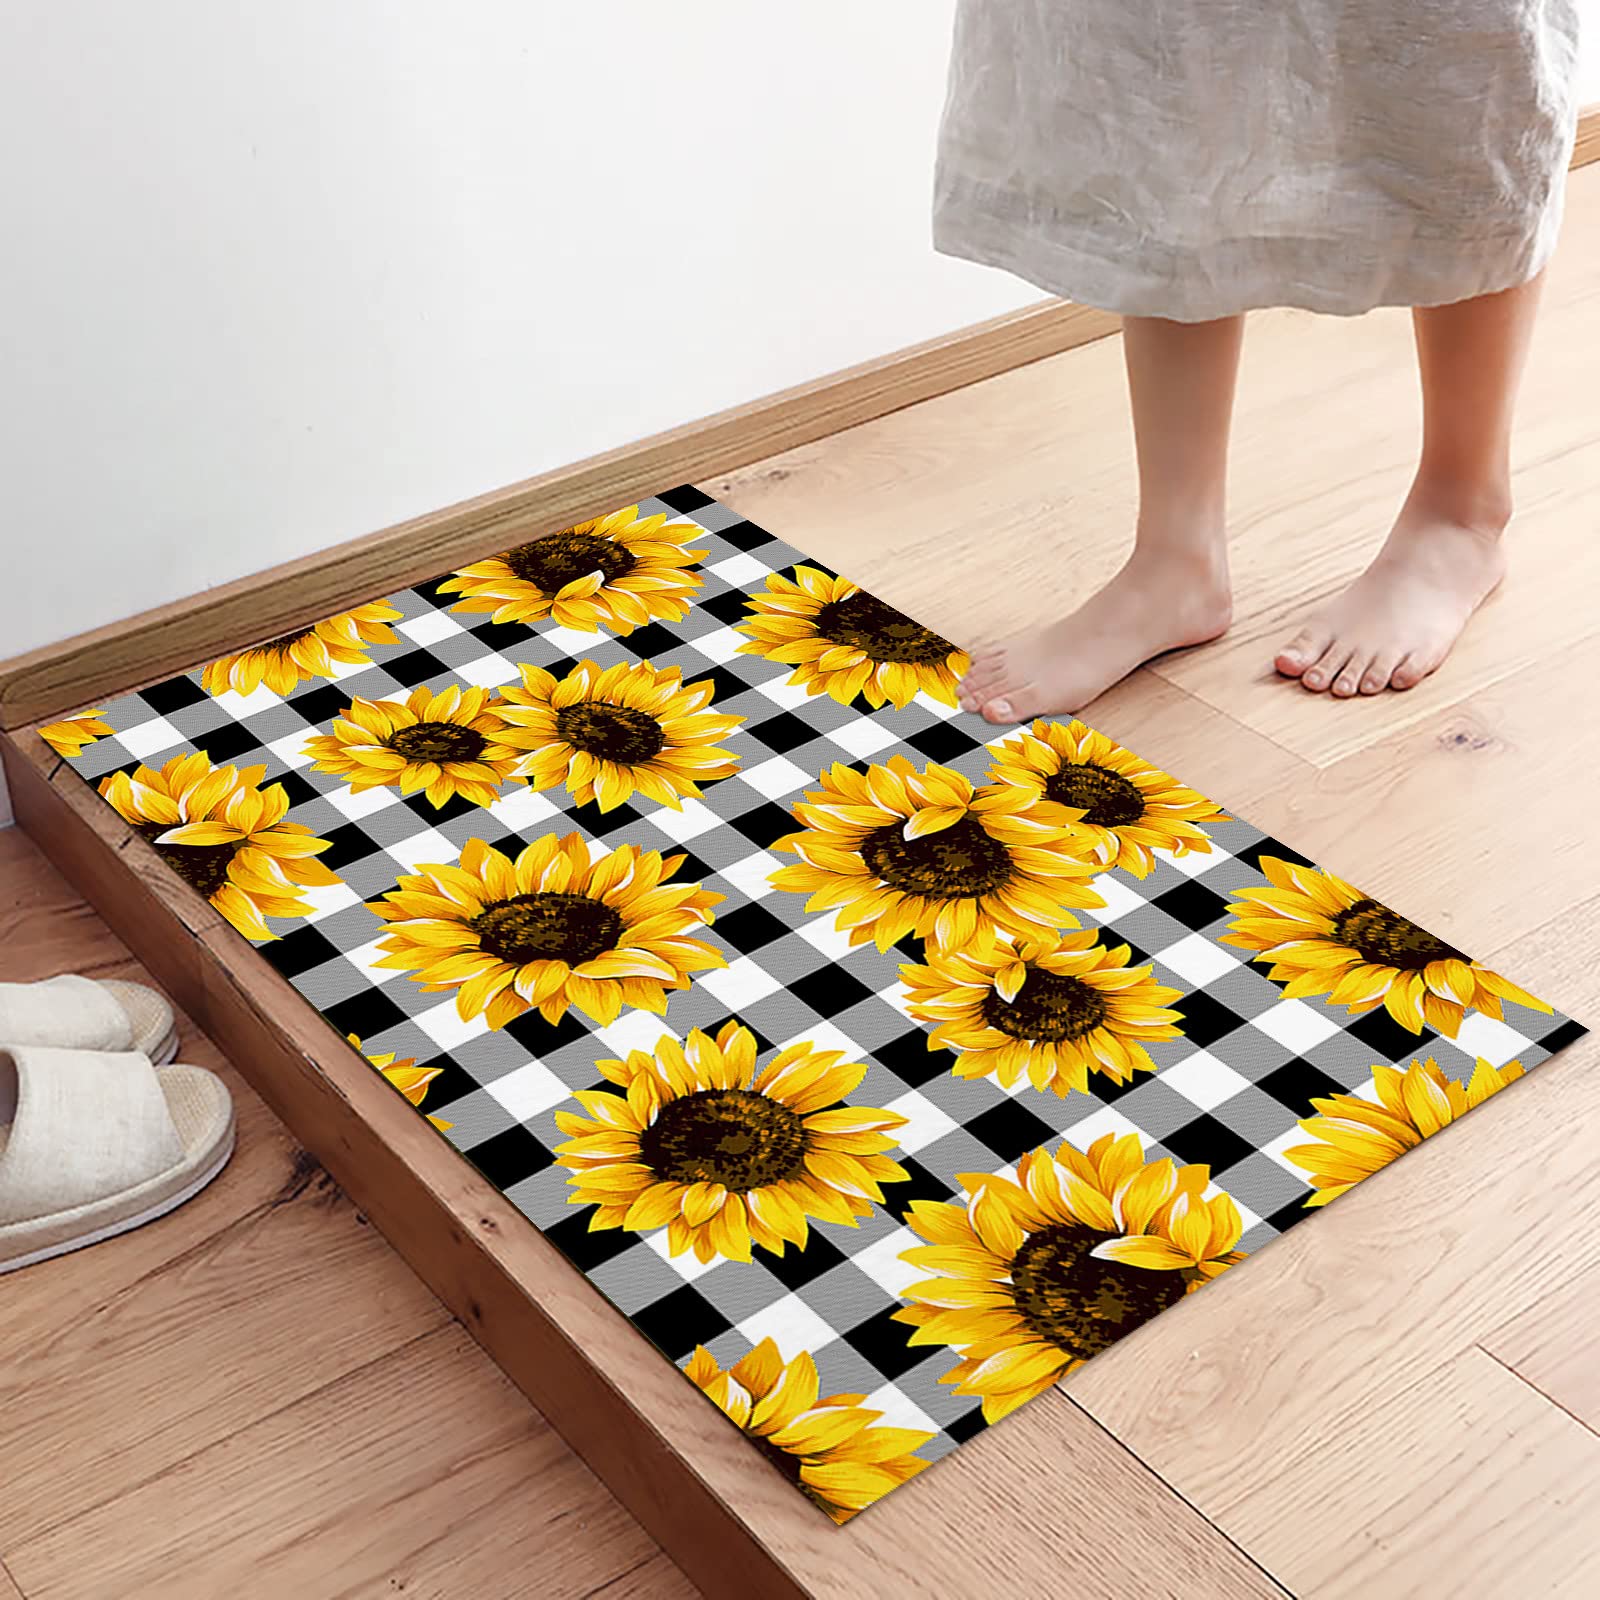 Sailground Kitchen Rugs and Mats Sets of 2, Summer Fresh Sunflower Black Buffalo Check Plaid Sweet Farm Life Time Indoor Floor Mats Non-Slip Area Rug Carpet for Bathroom Living Room Office Home Decor